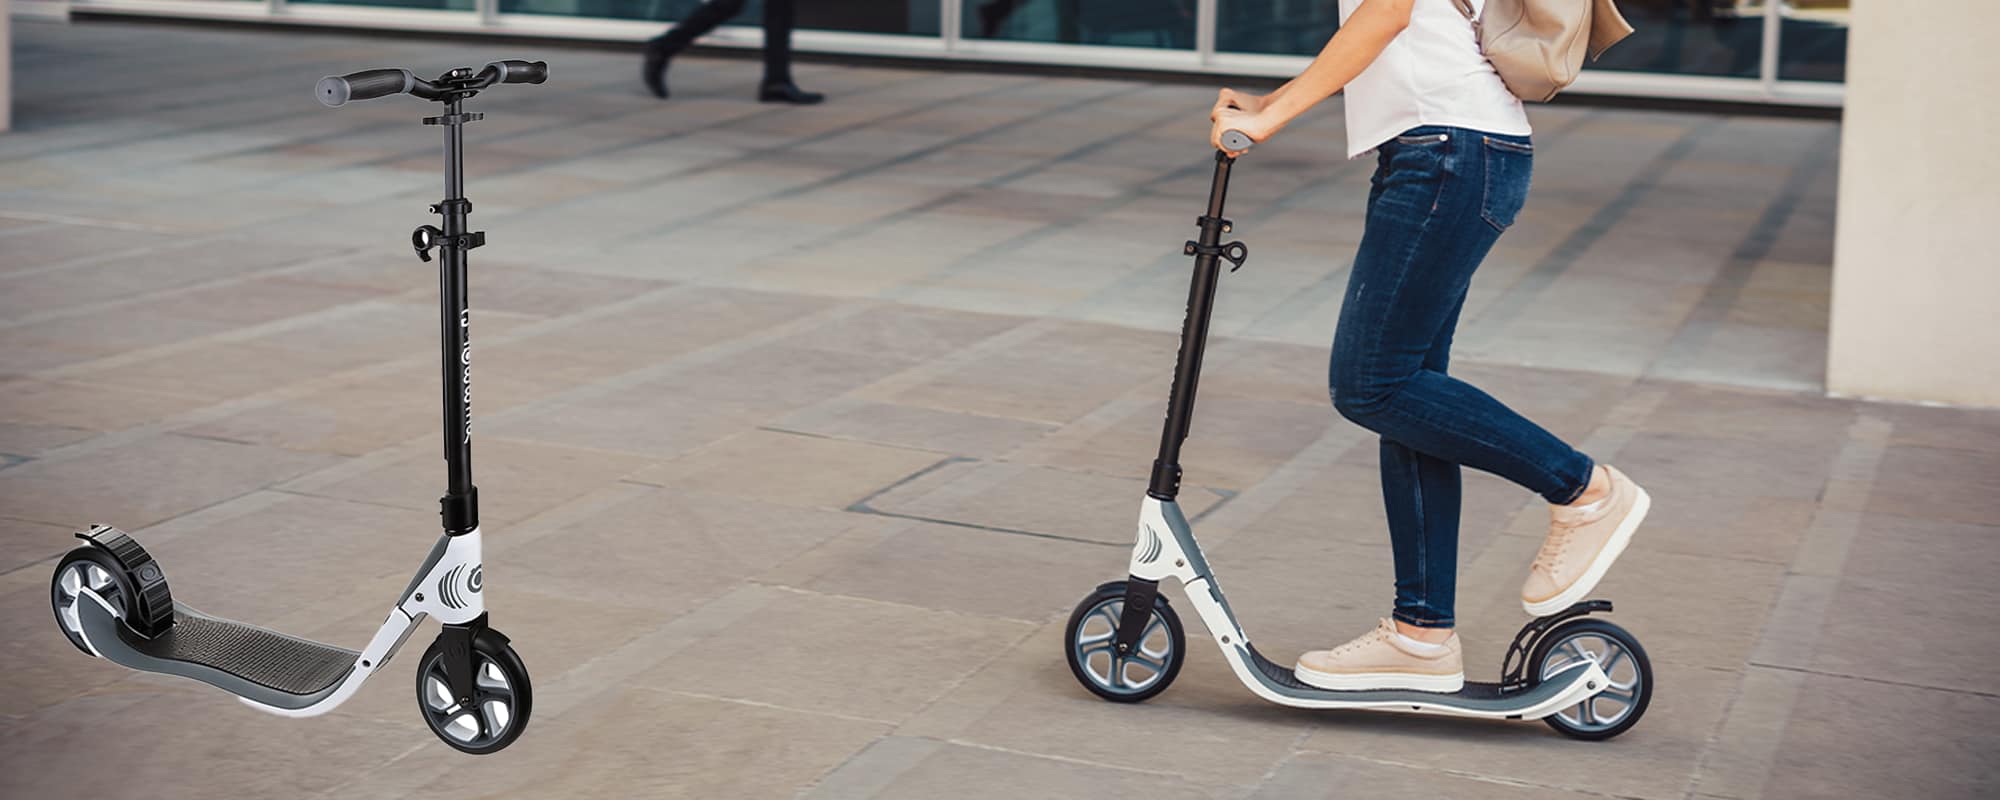 WIN A Globber ONE NL 205 Adult Scooter